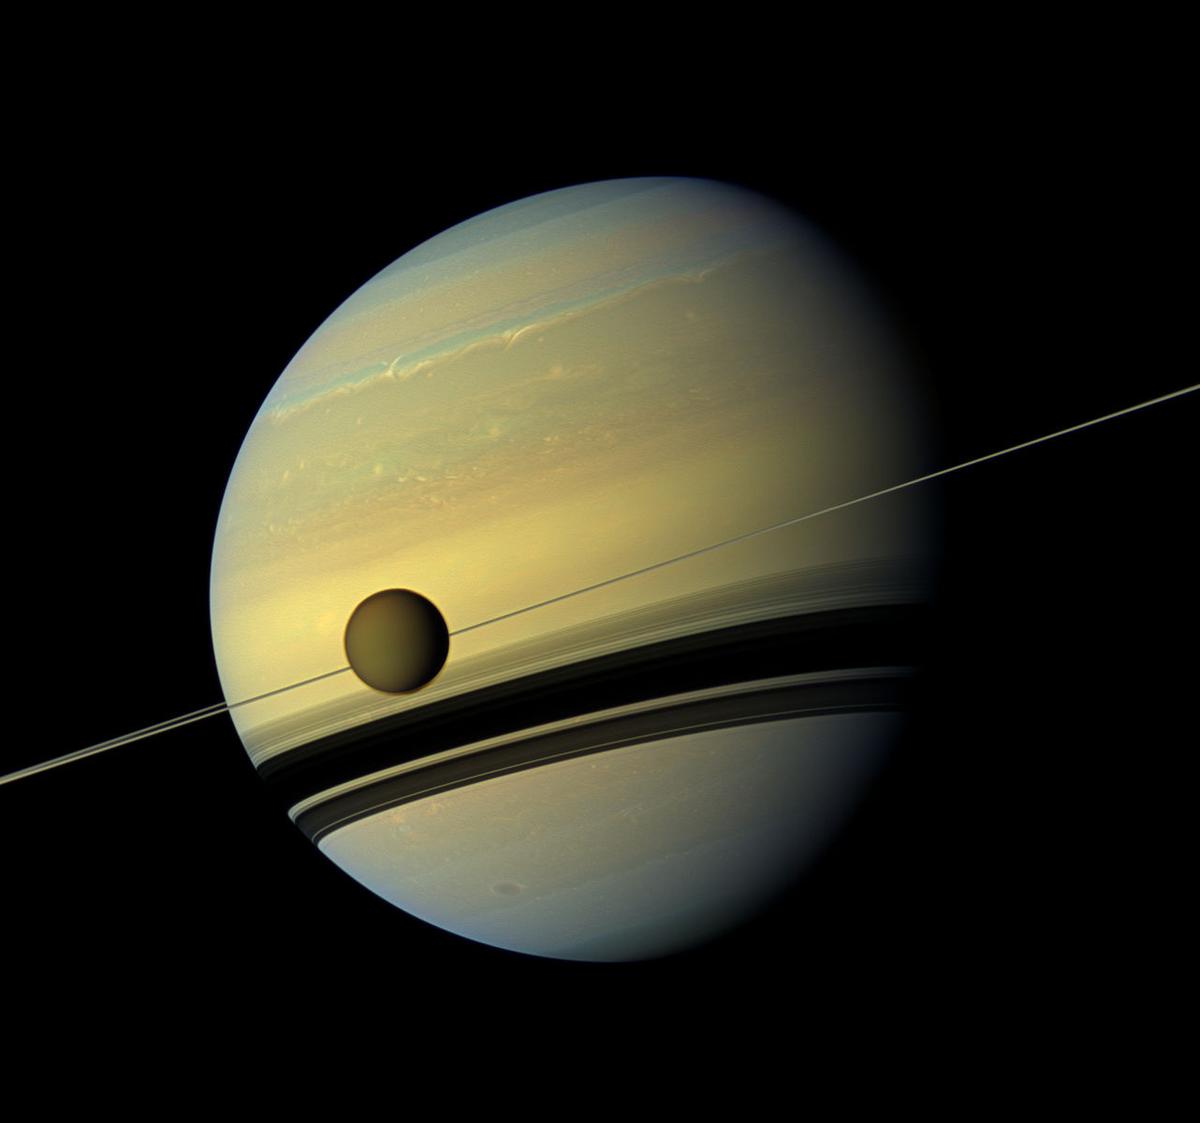 (<a href="https://commons.wikimedia.org/wiki/File:Titan_in_front_of_the_ring_and_Saturn.jpg">NASA/JPL-Caltech/Space Science Institute</a>)